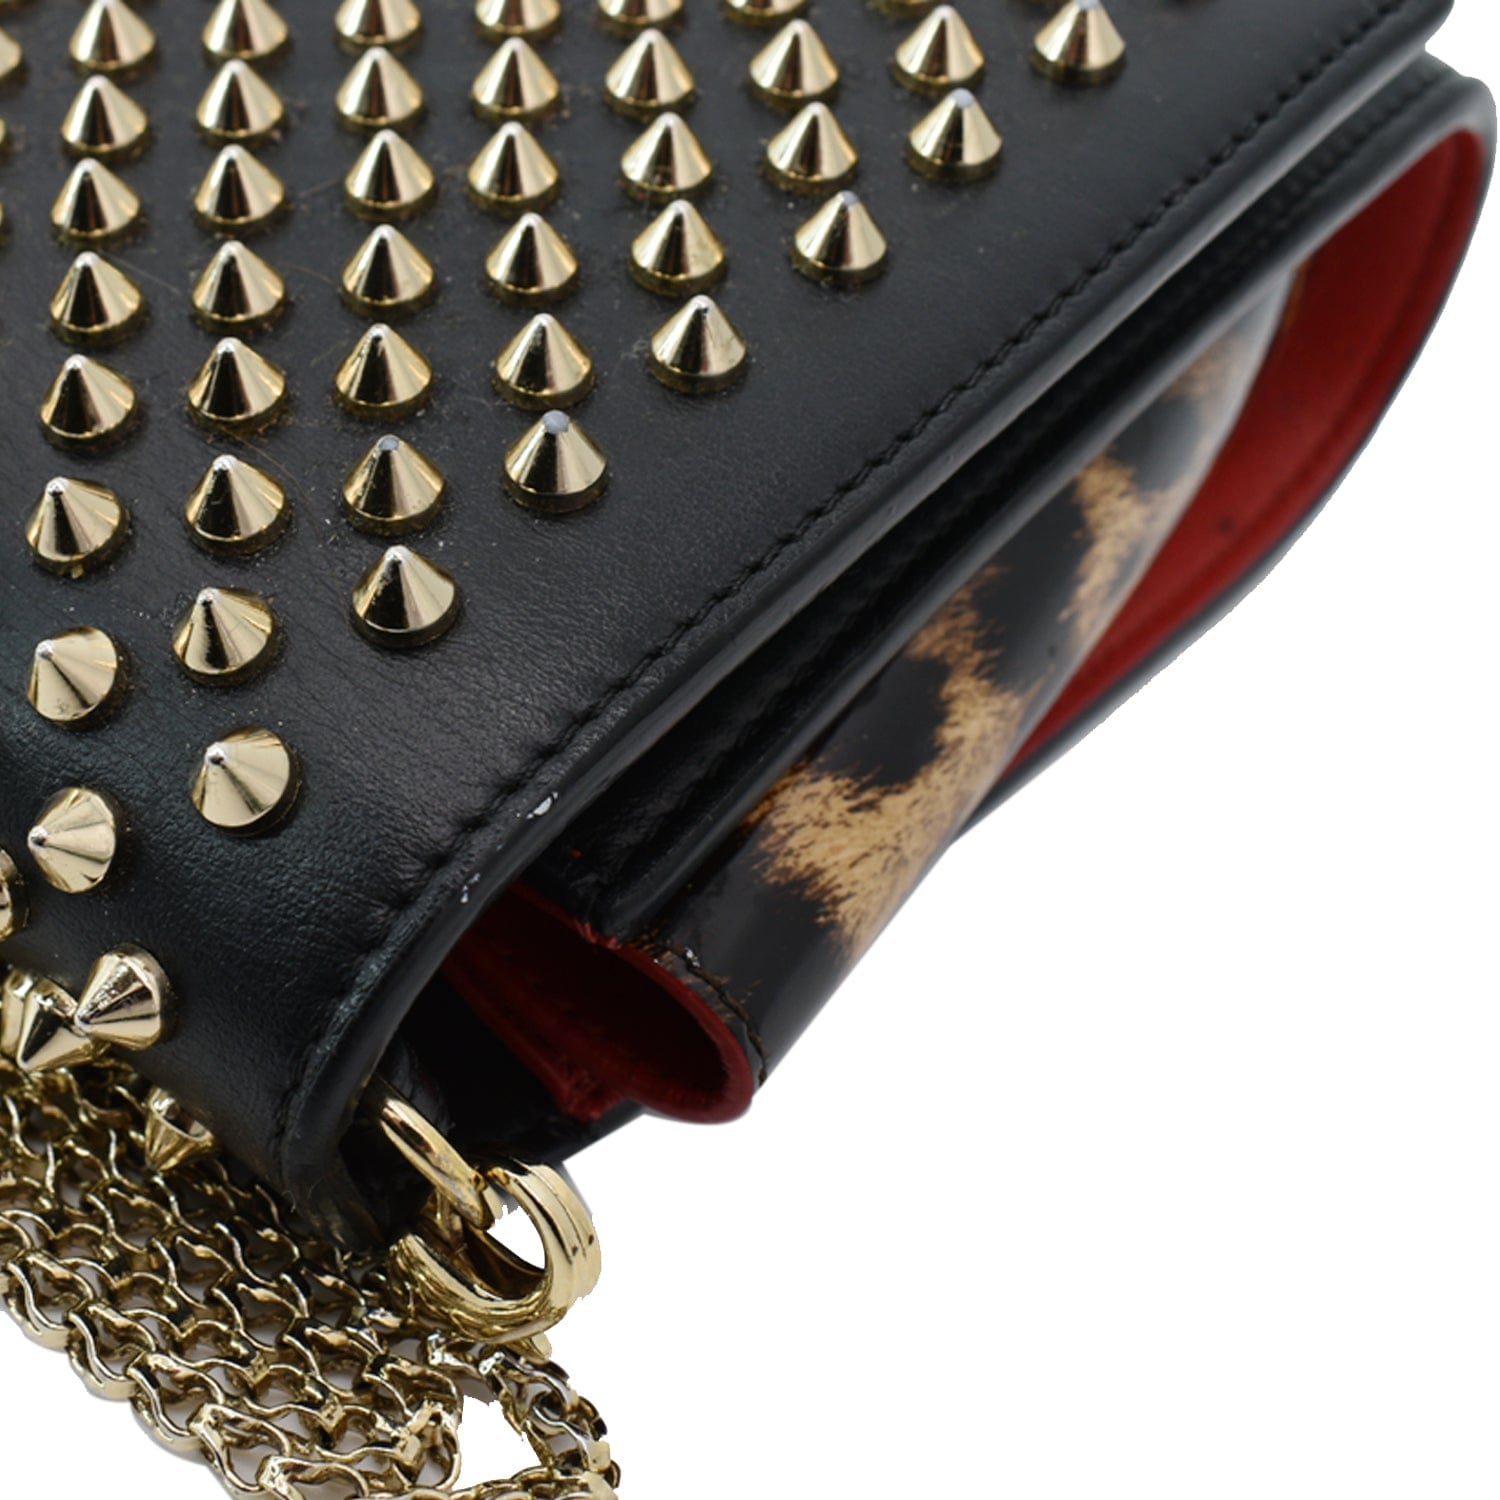 Wallets & purses Christian Louboutin - Wallet with logo in black